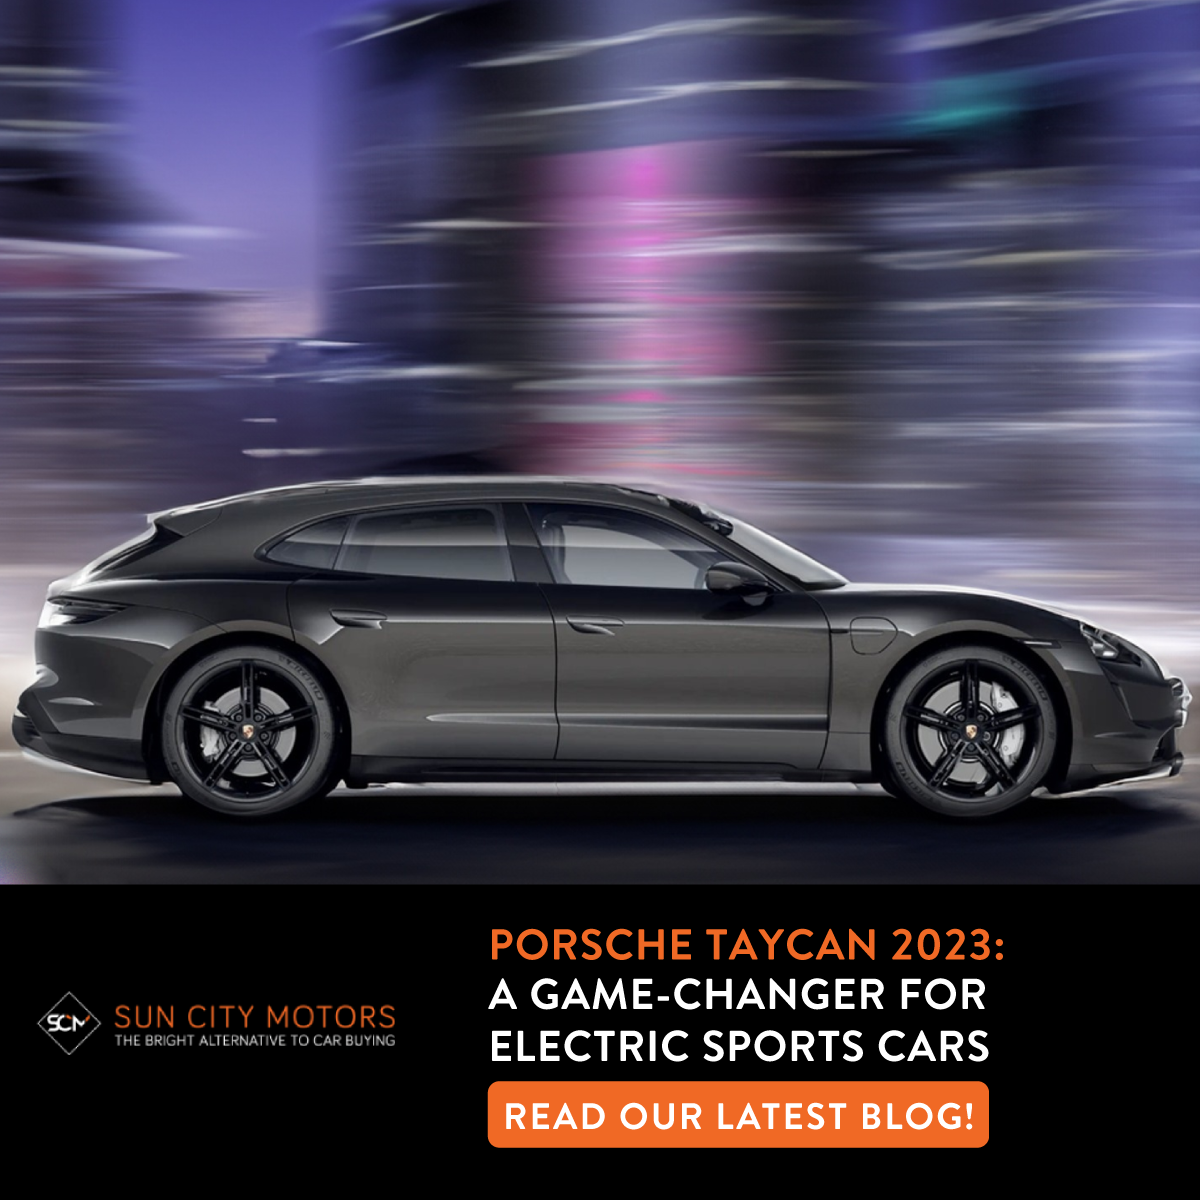 Porsche Taycan 2023: A Game-Changer for Electric Sports Cars